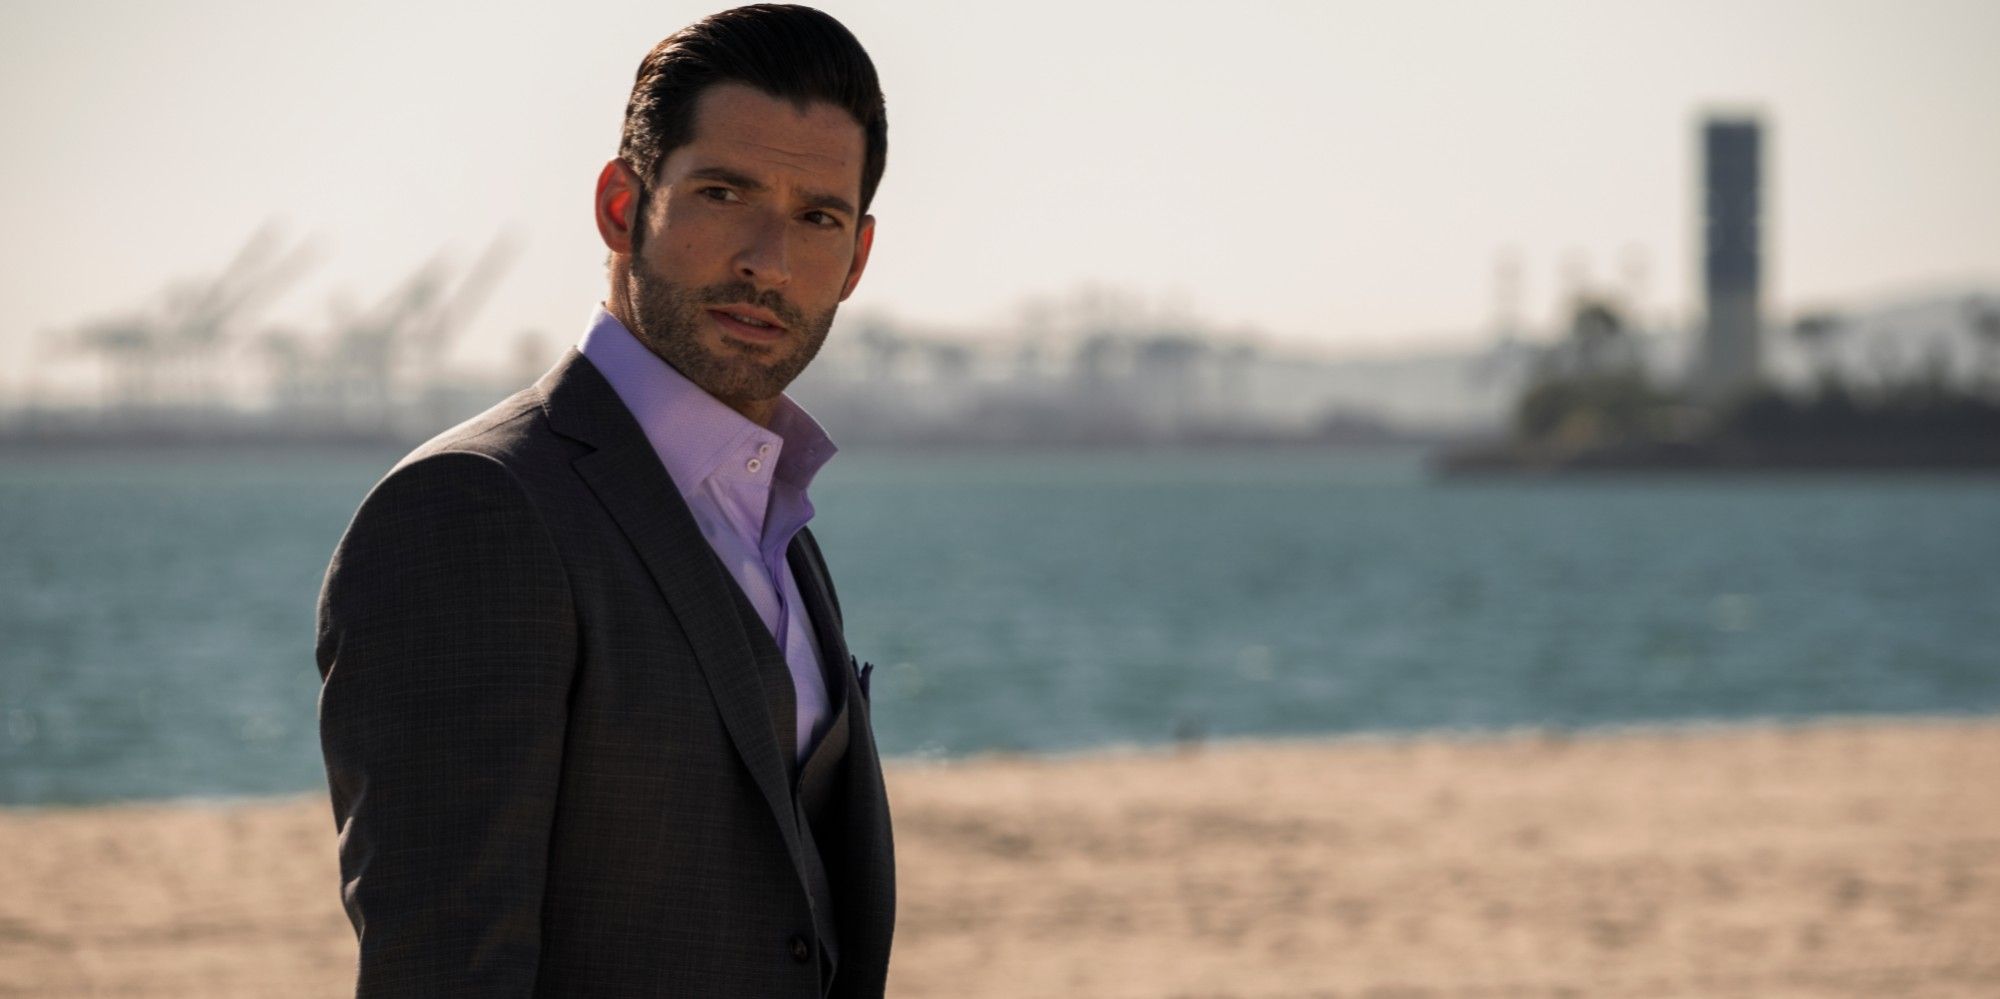 Lucifer Season 5 Introduces Hilarious Show-Within-A-Show About The Devil